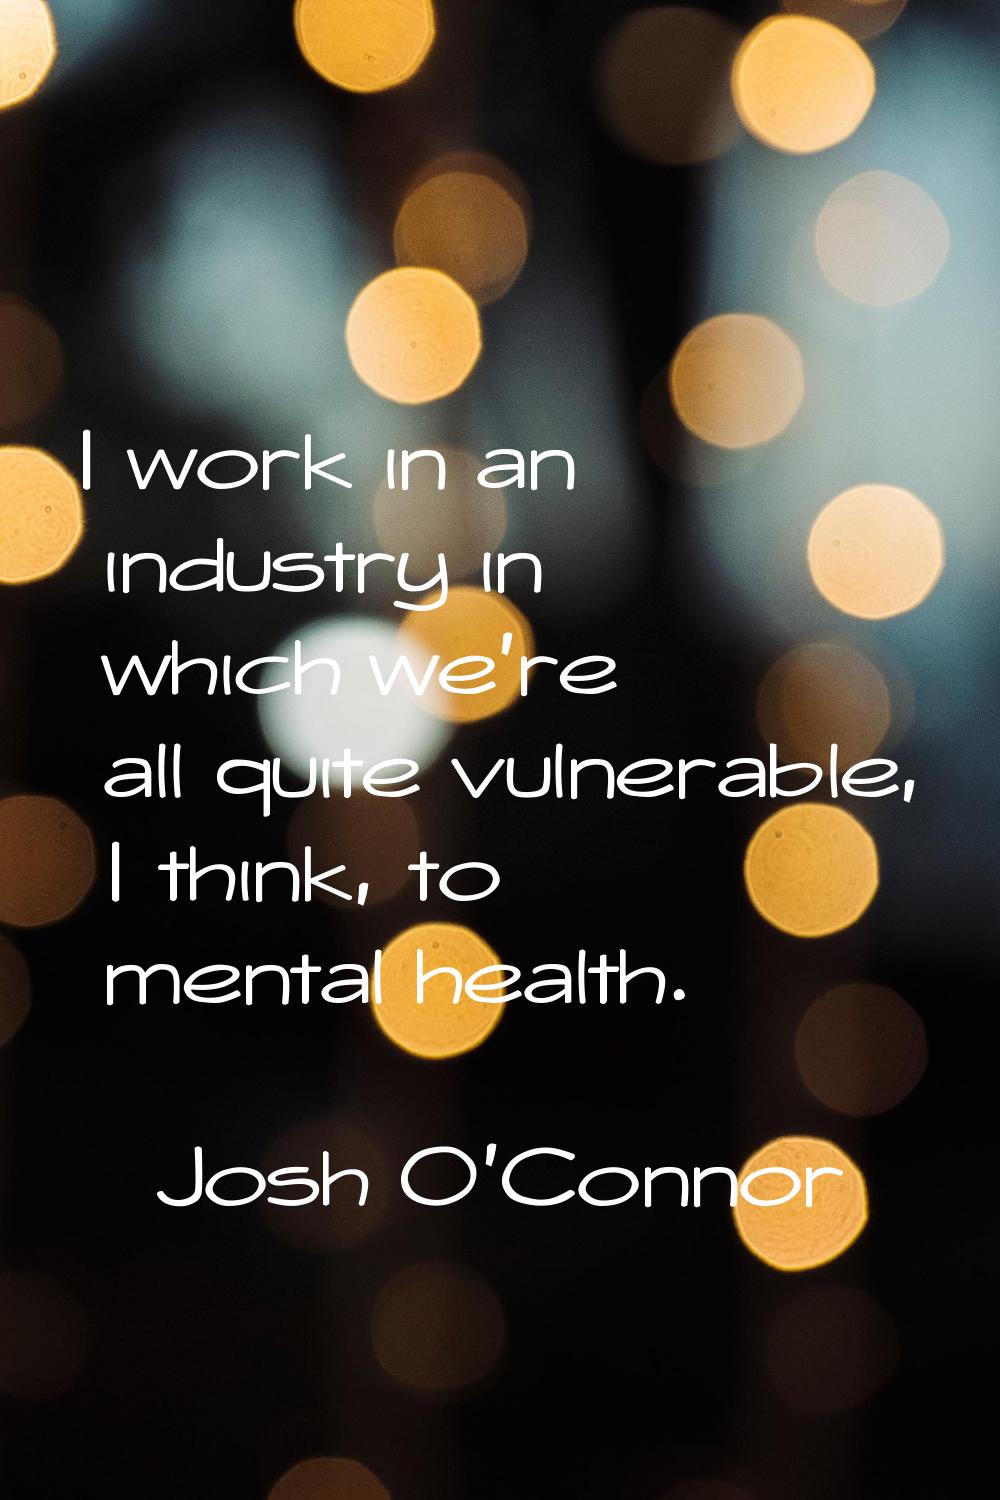 I work in an industry in which we're all quite vulnerable, I think, to mental health.